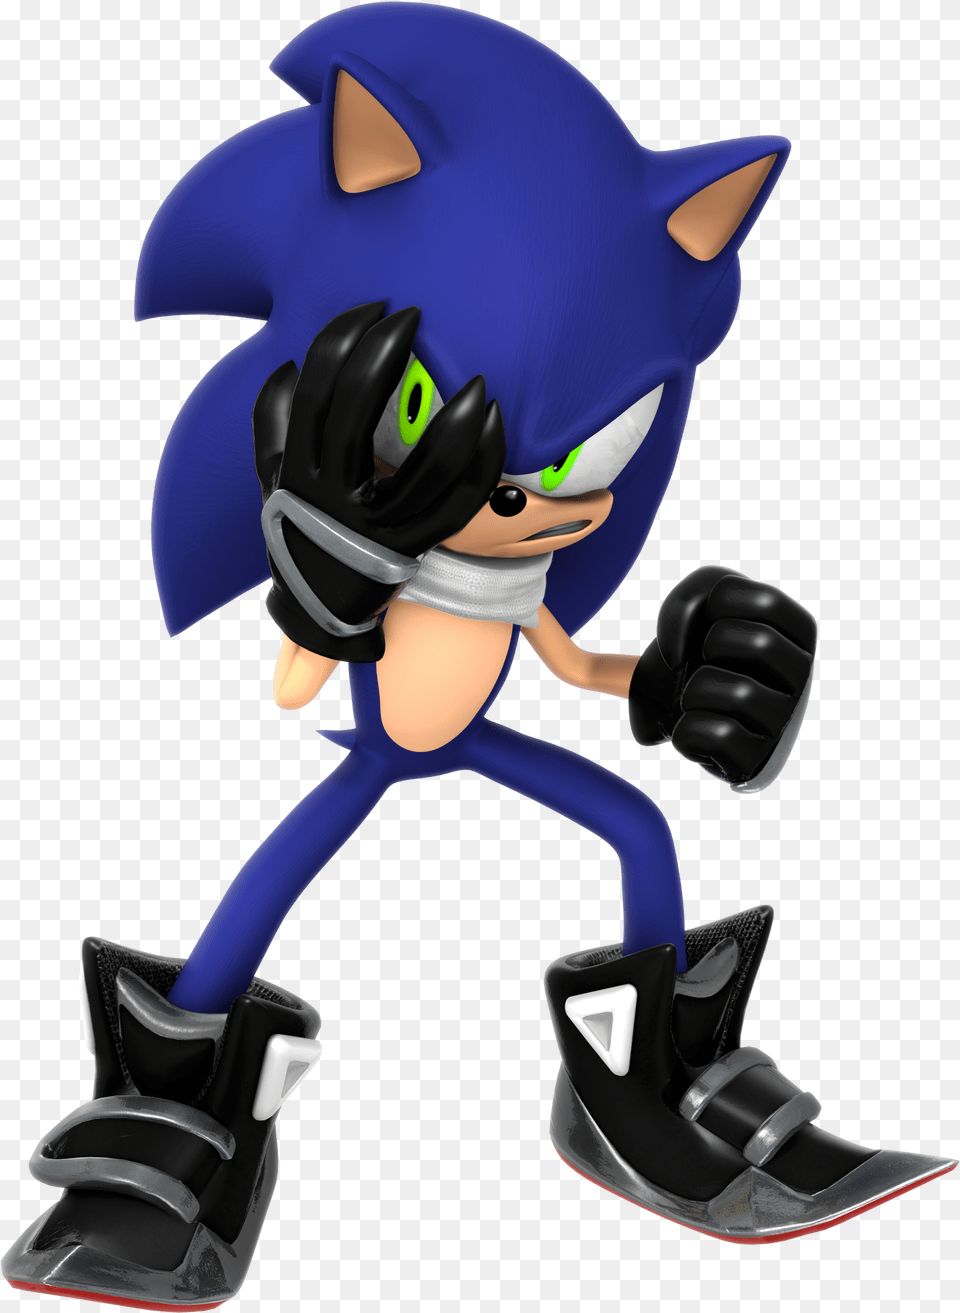 Press Question Mark To See Available Shortcut Keys Nibroc Rock Sonic Render, Clothing, Glove, Adult, Female Png